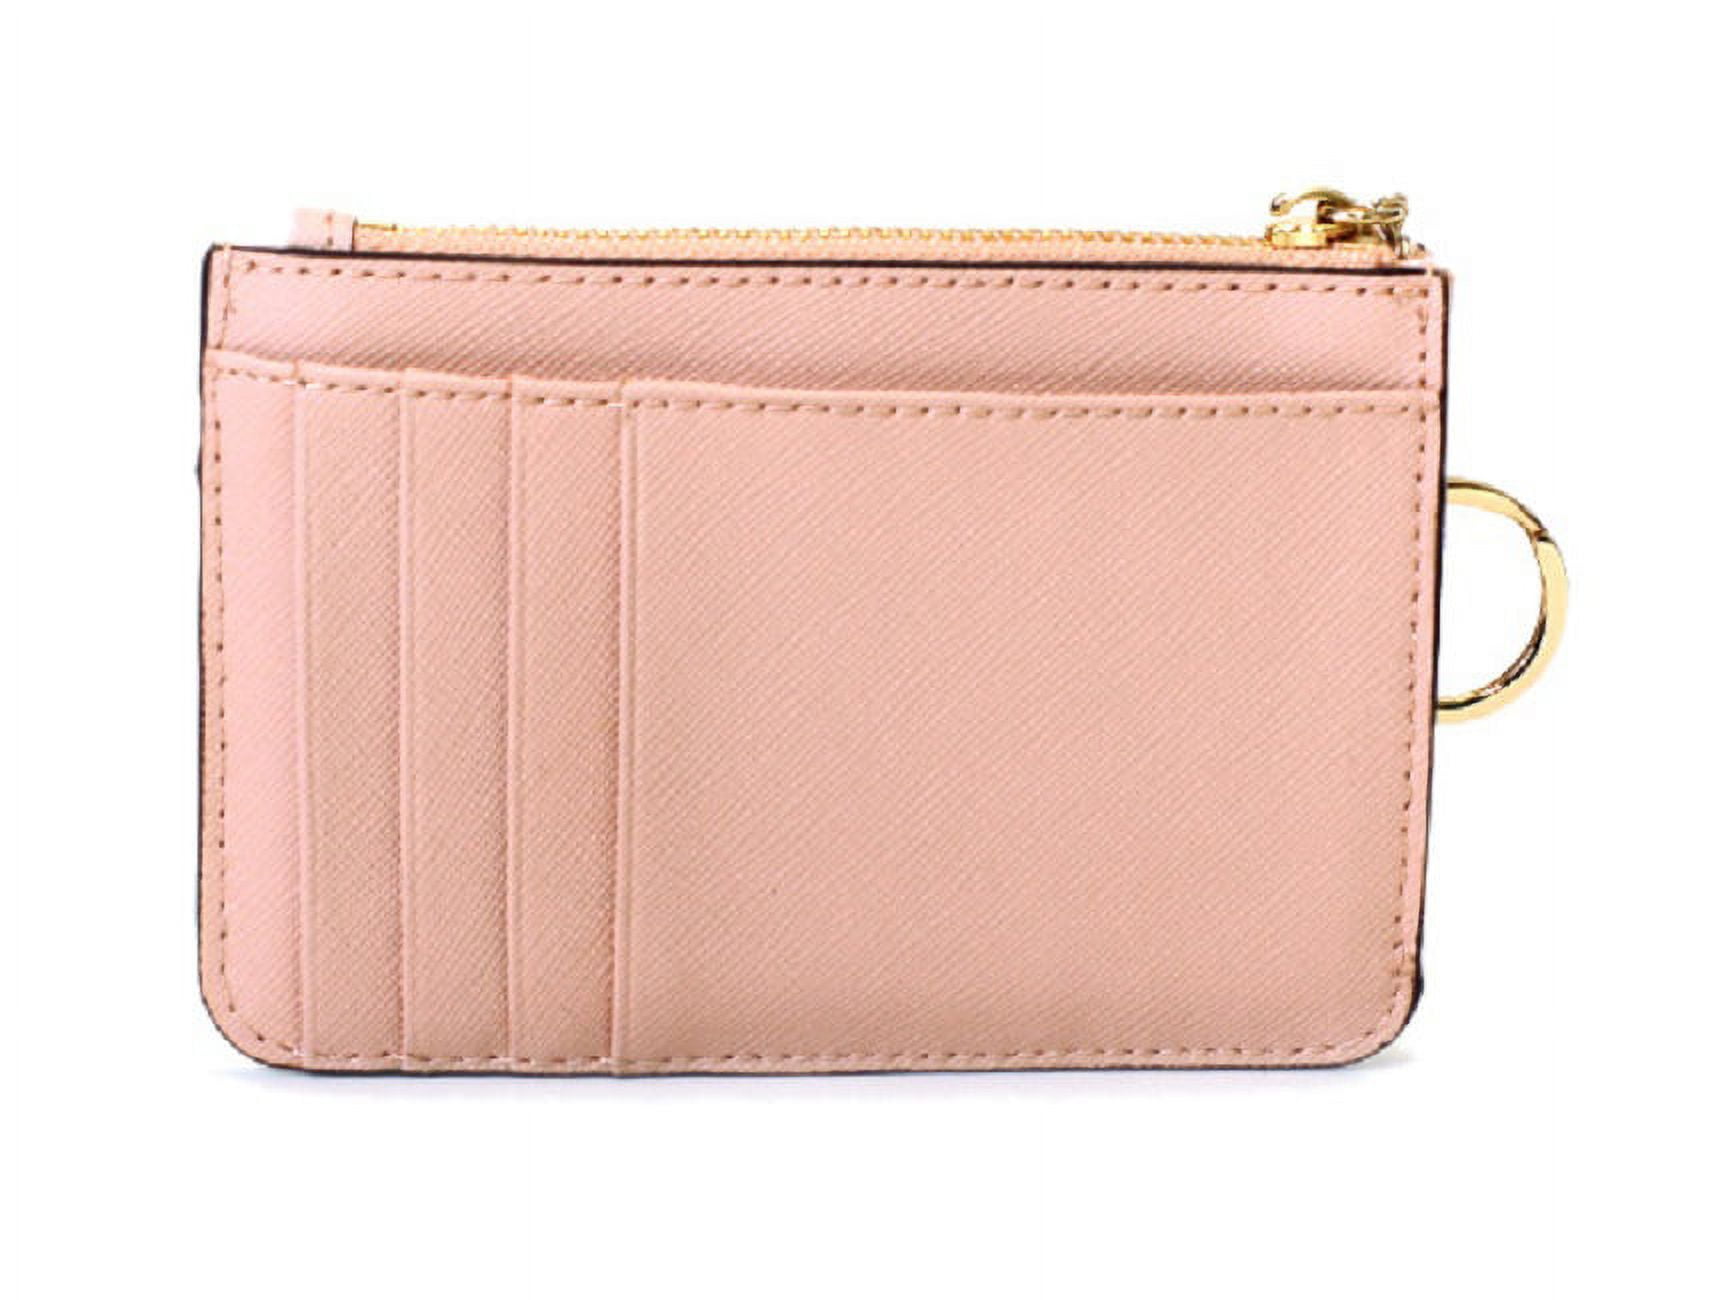 Kate Spade Laurel Way Bitsy key chain Wallet Coin Purse, Nw Darcy